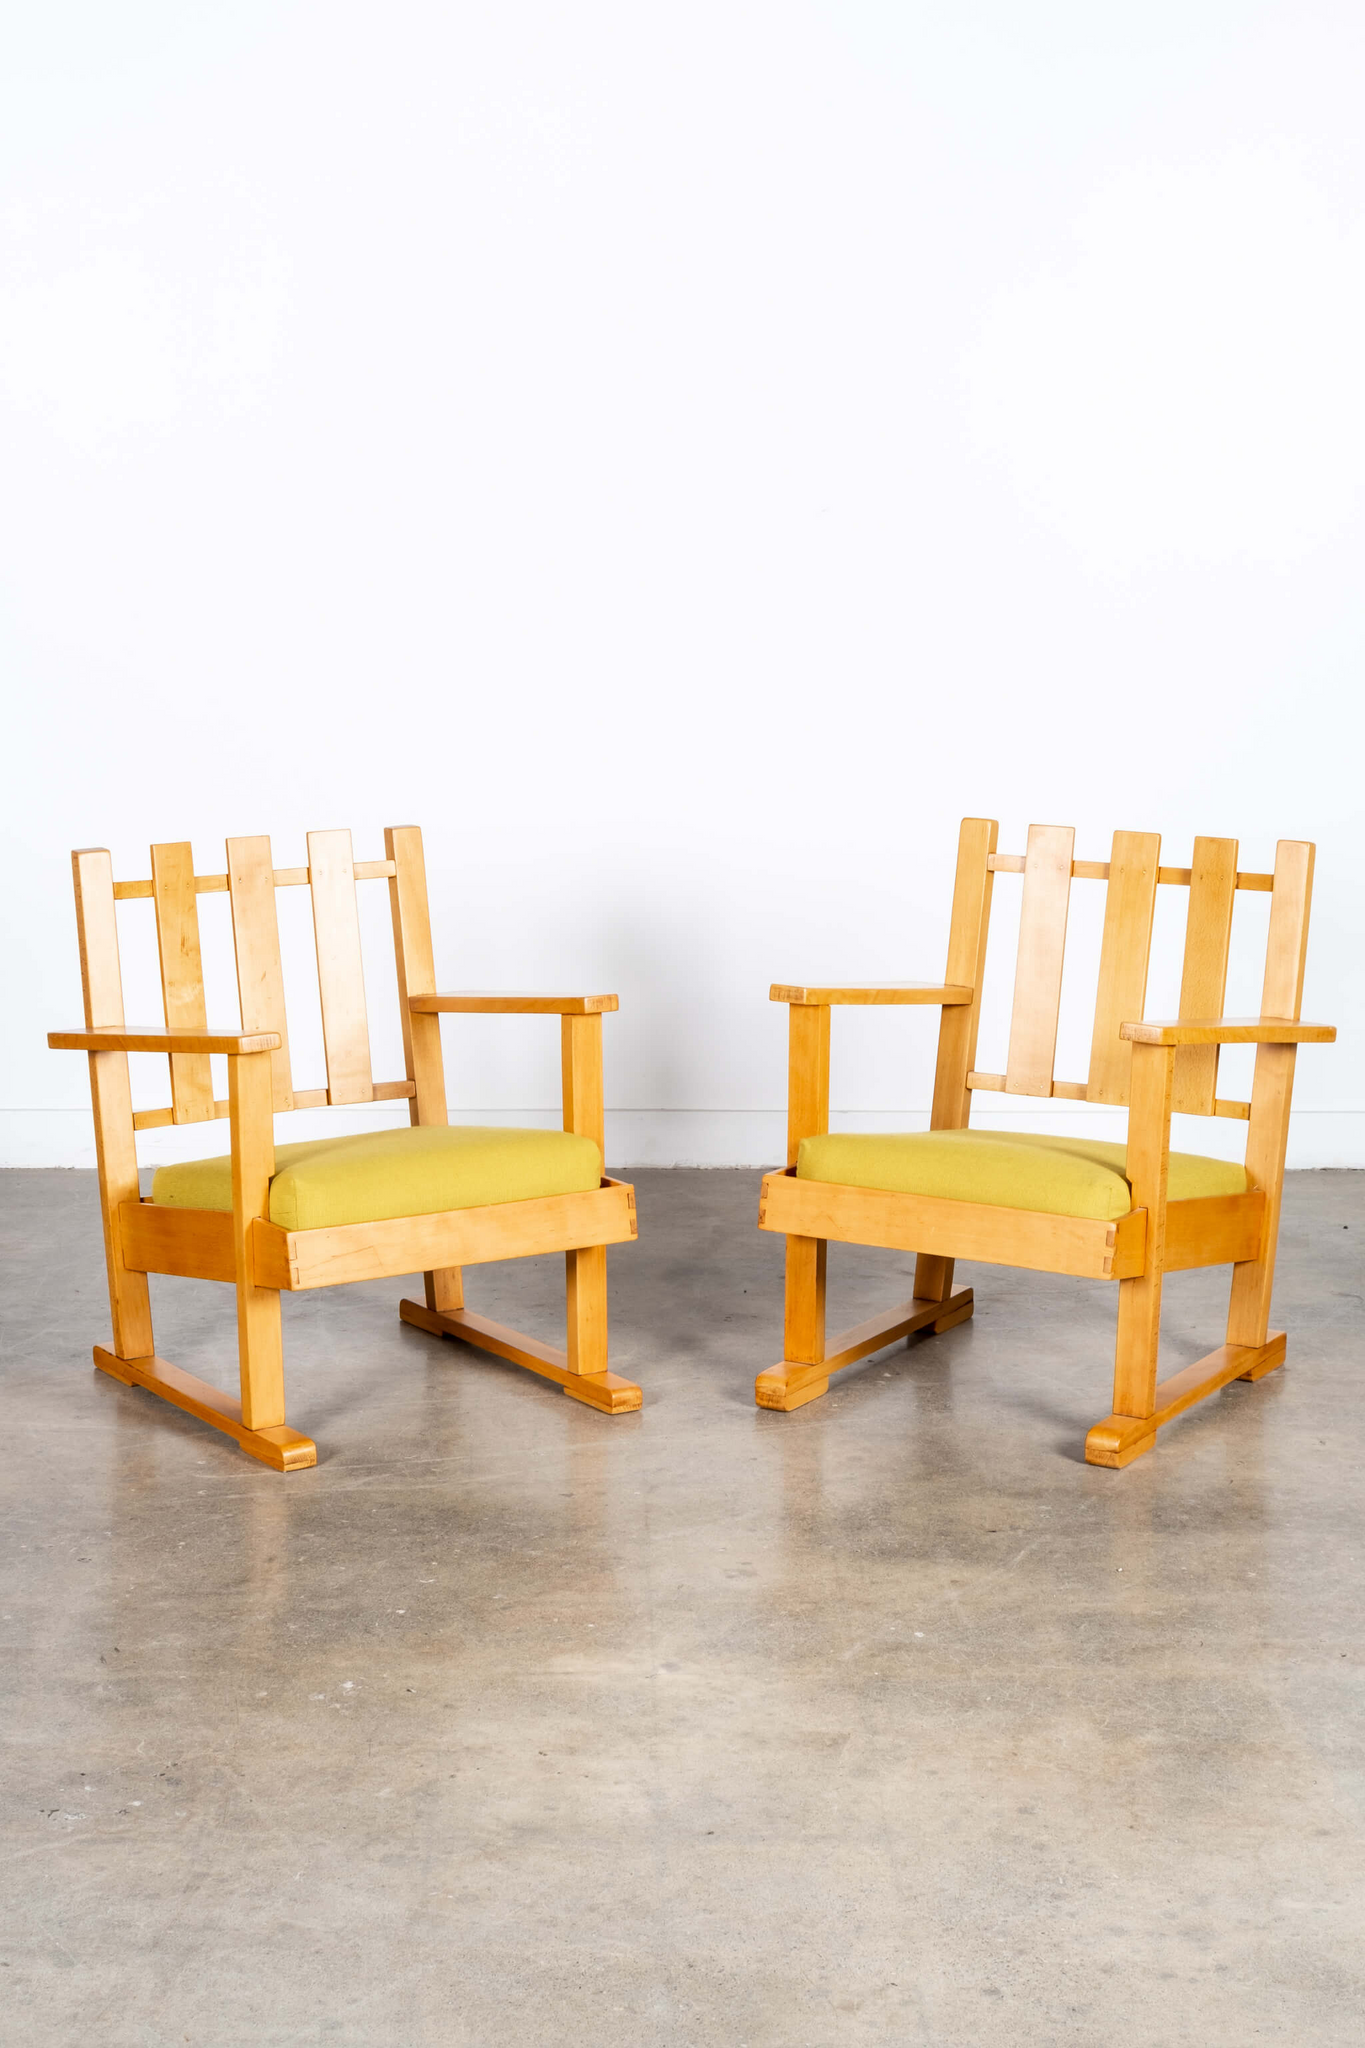 Pair of Wood Lounge Chairs with Slatted Backs